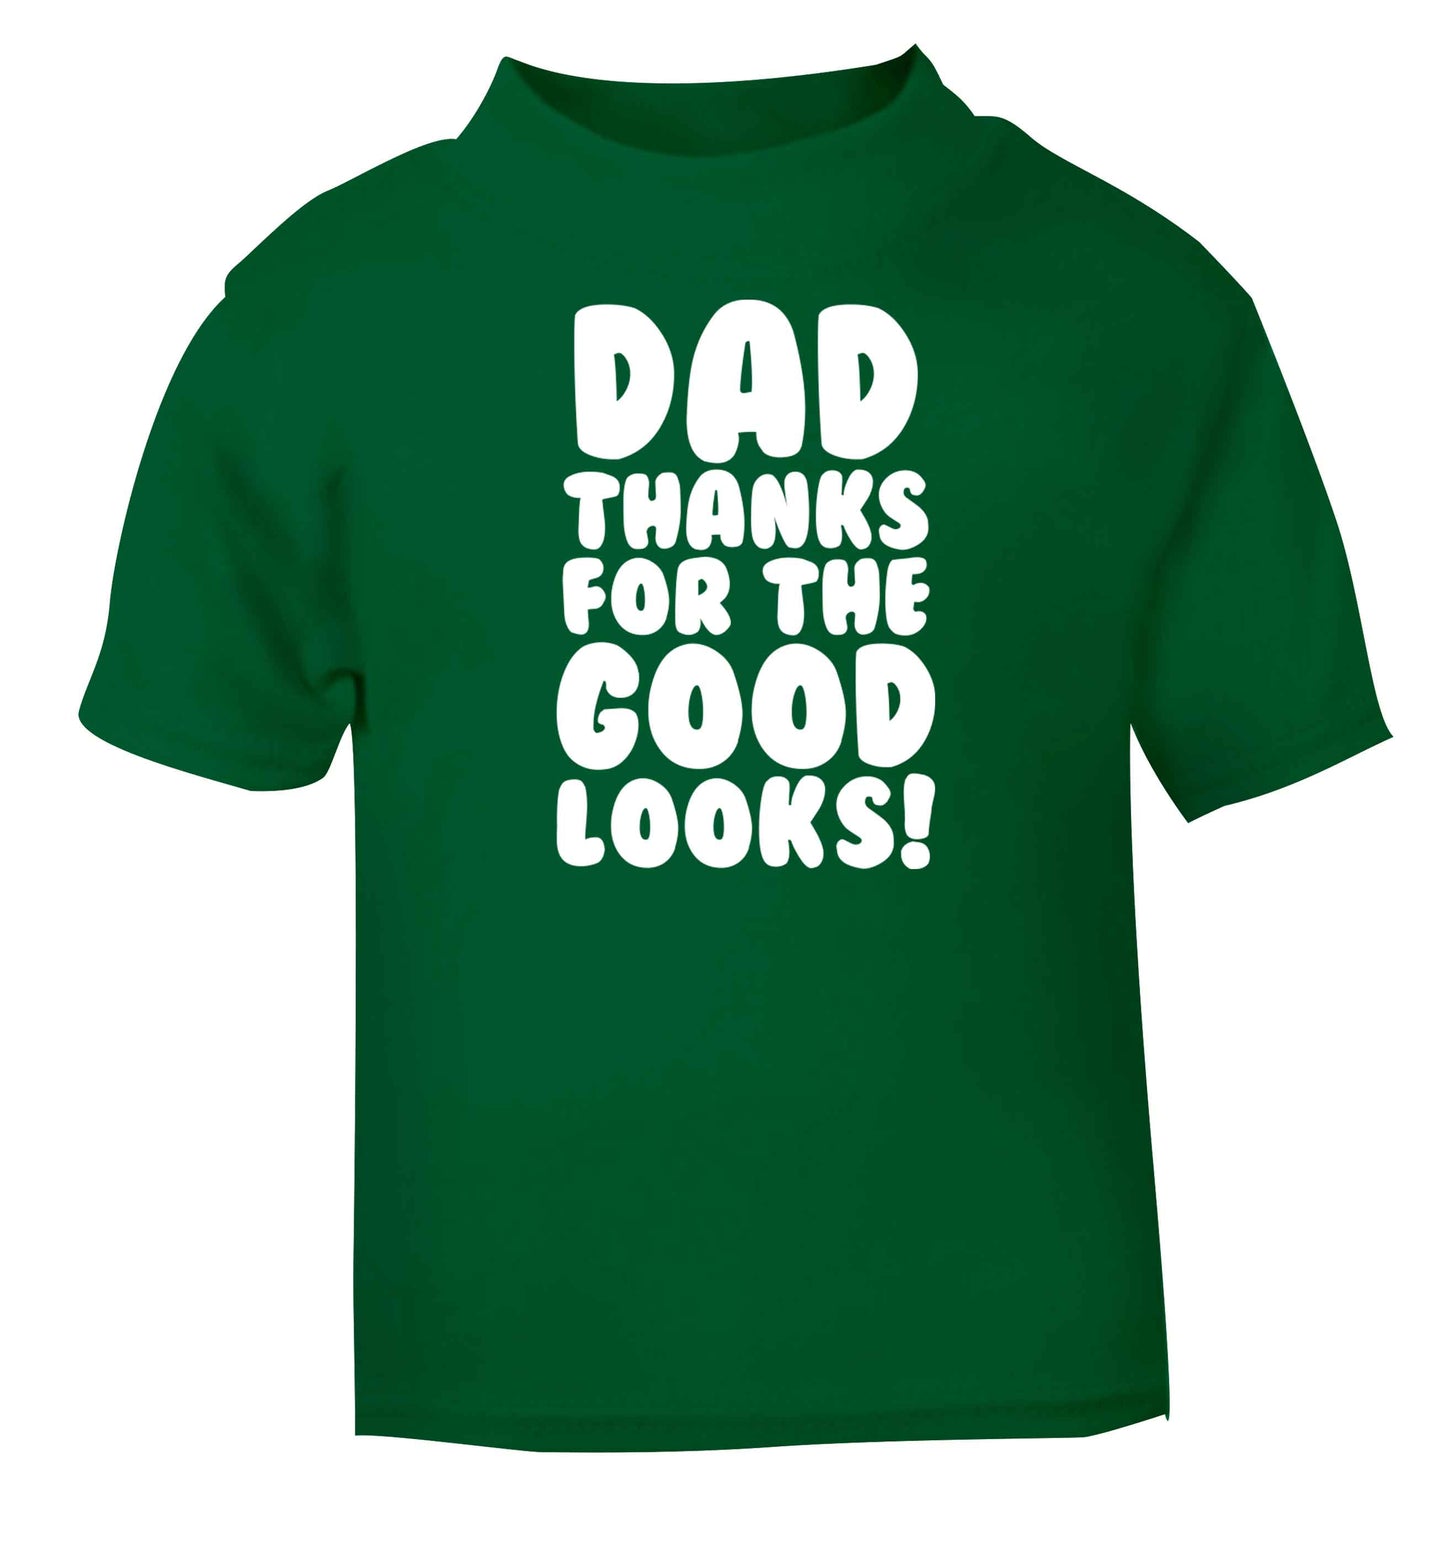 Dad thanks for the good looks green baby toddler Tshirt 2 Years